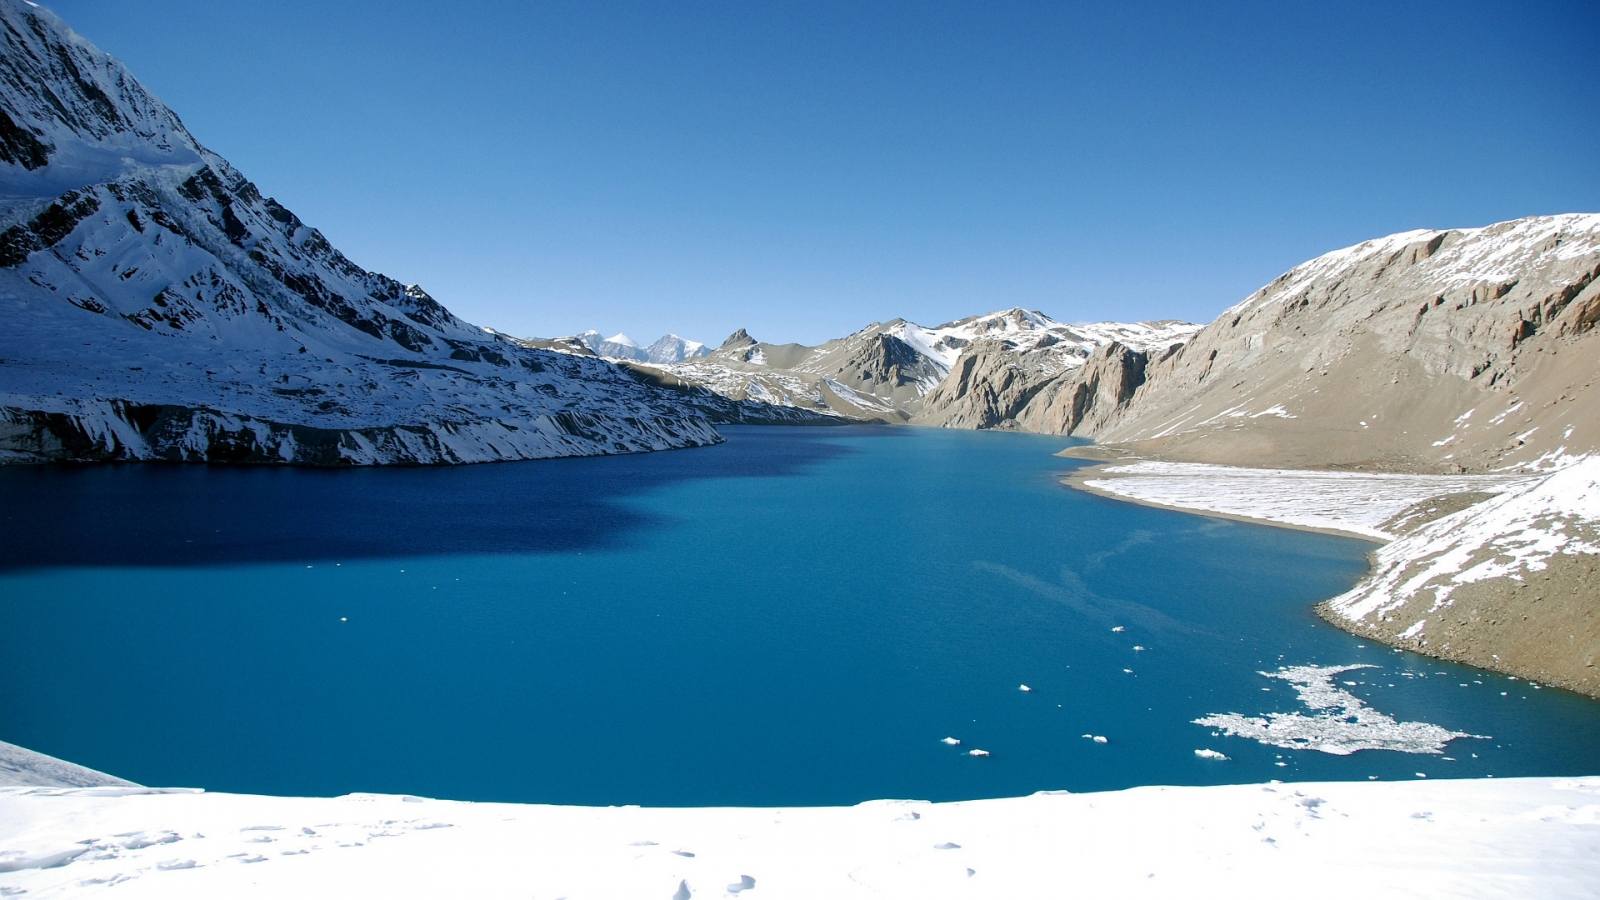 Tilicho Lake View for 1600 x 900 HDTV resolution